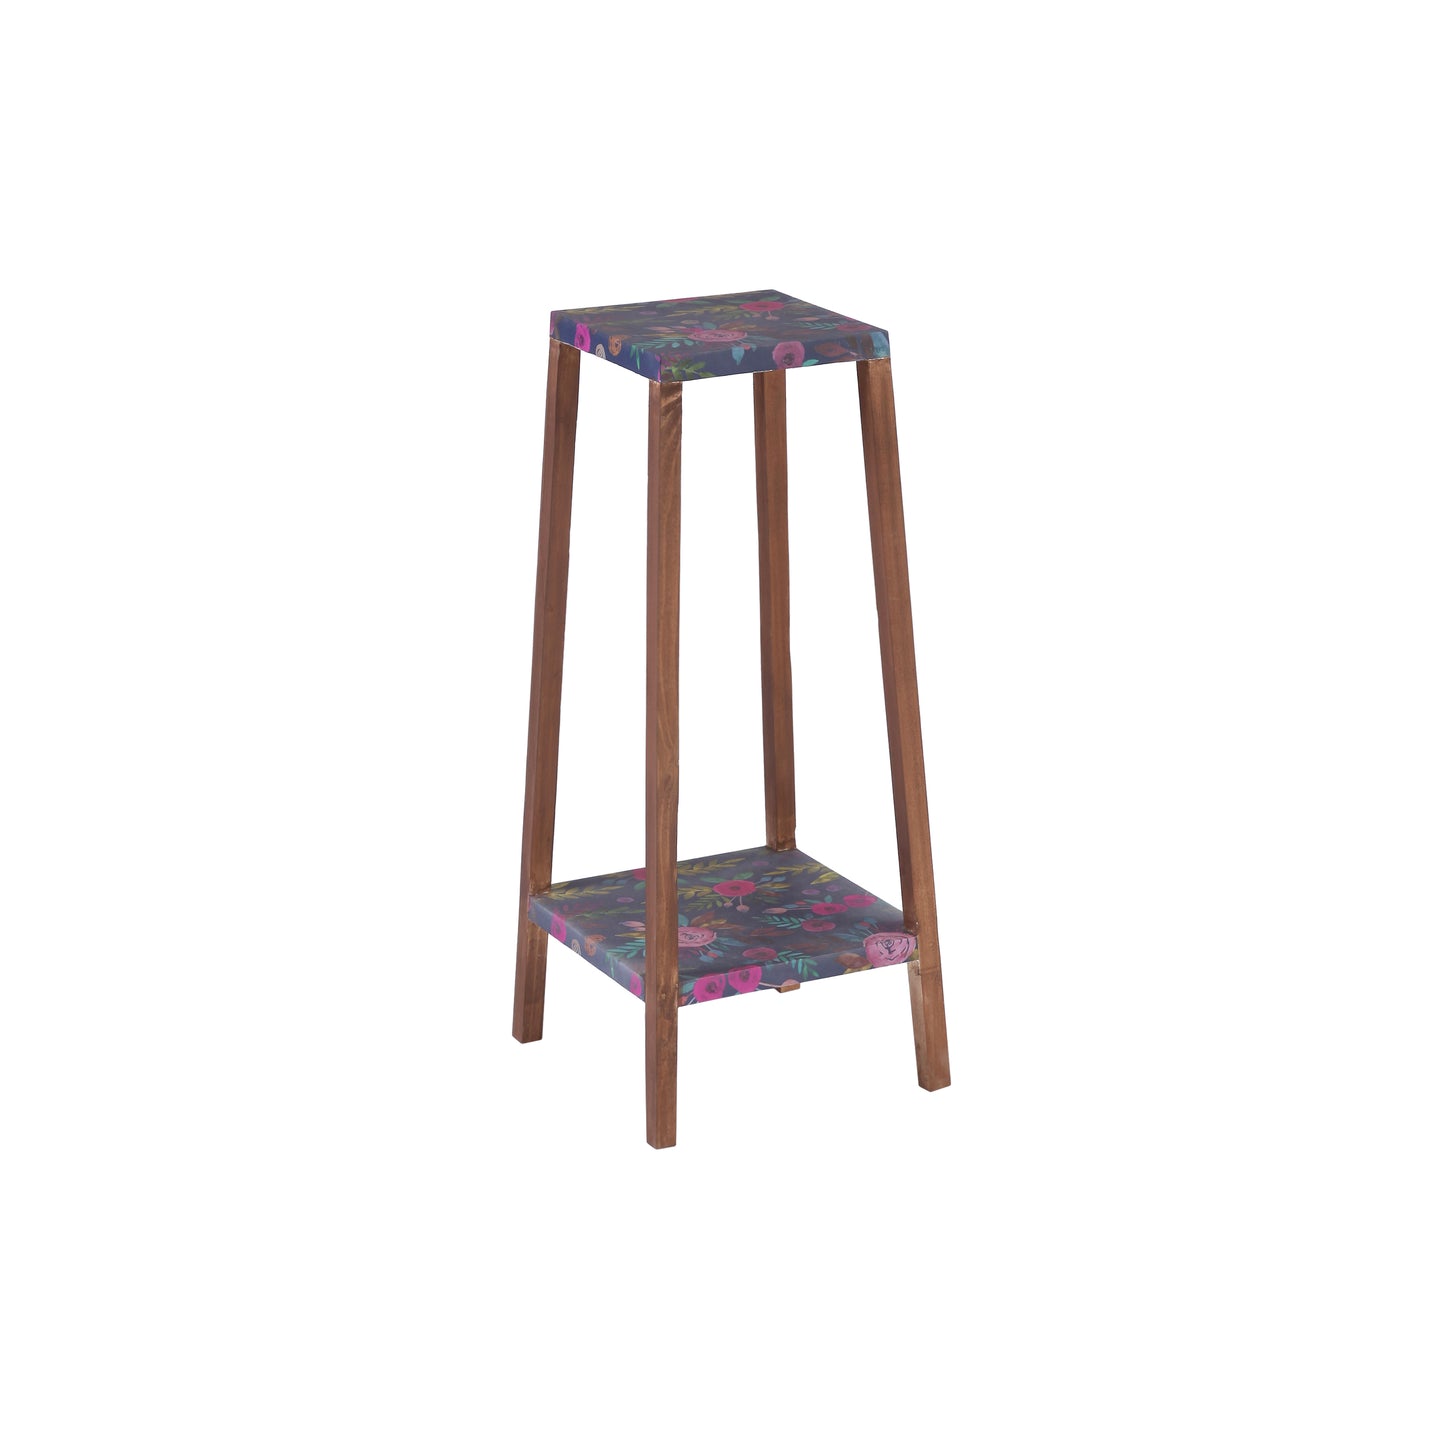 A Tiny Mistake Square Four Legged Tapering Two Tier Decorative Stand (Two Tiers) (Floral Base with Dark Legs)